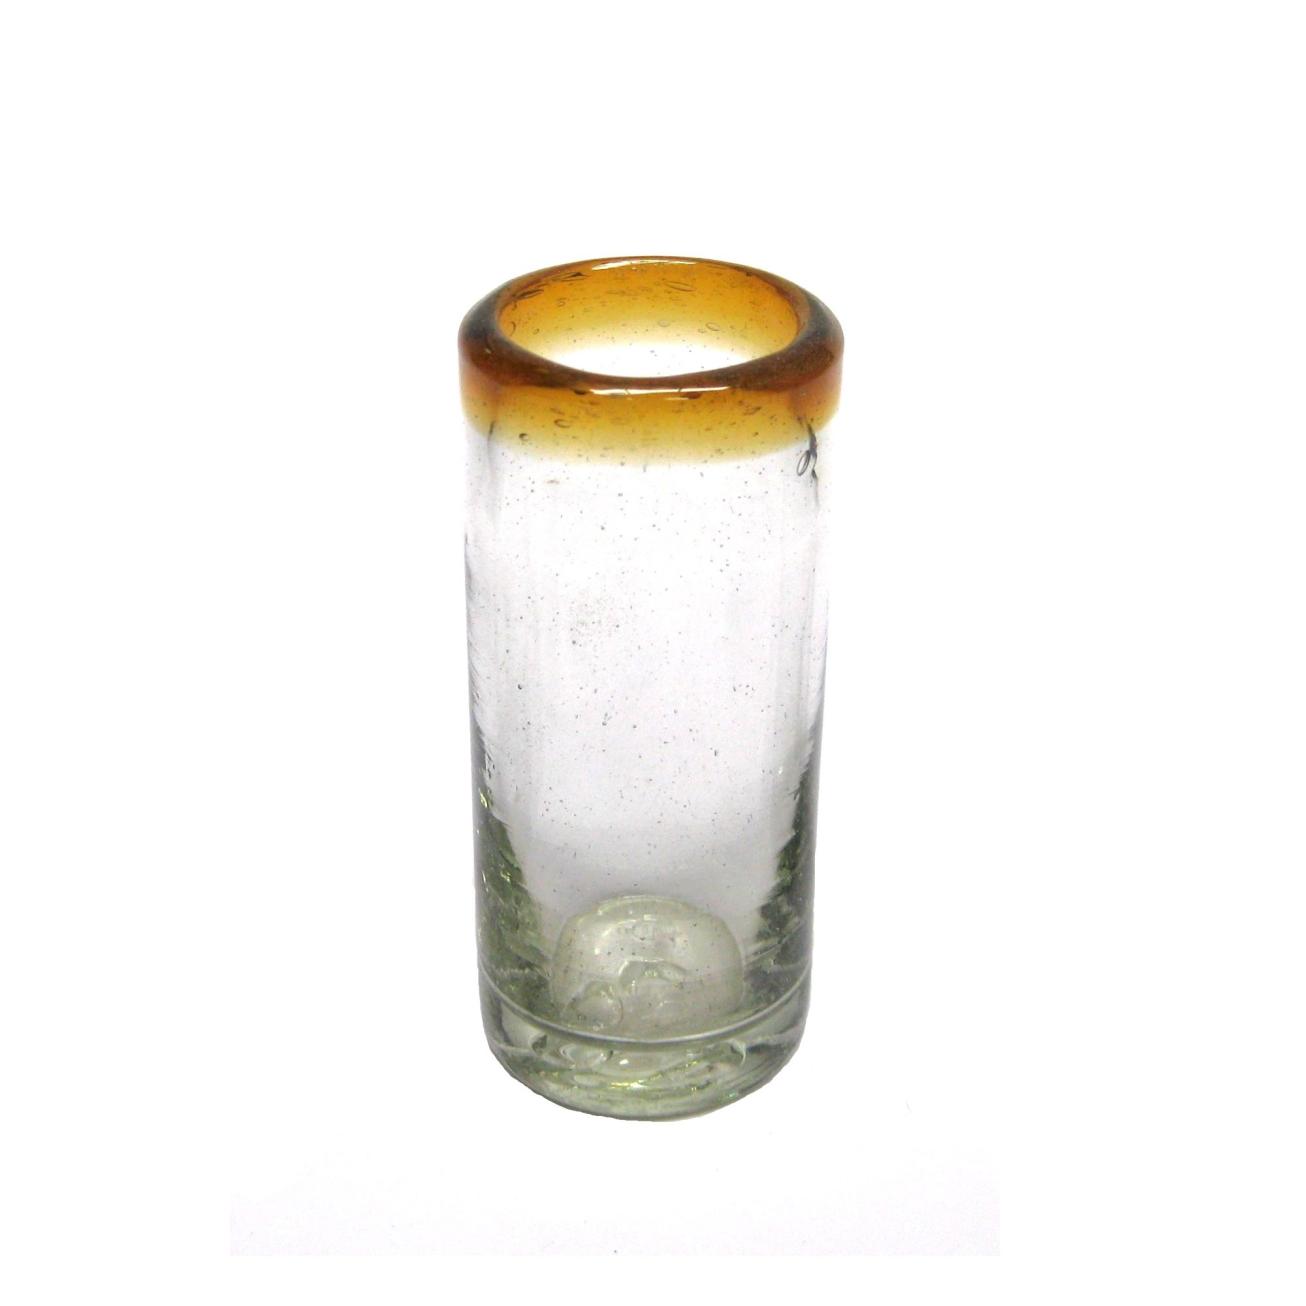 Colored Rim Glassware / Amber Rim 2 oz Tequila Shot Glasses (set of 6) / These shot glasses bordered in amber color are perfect for sipping your favourite tequila or any other liquor.